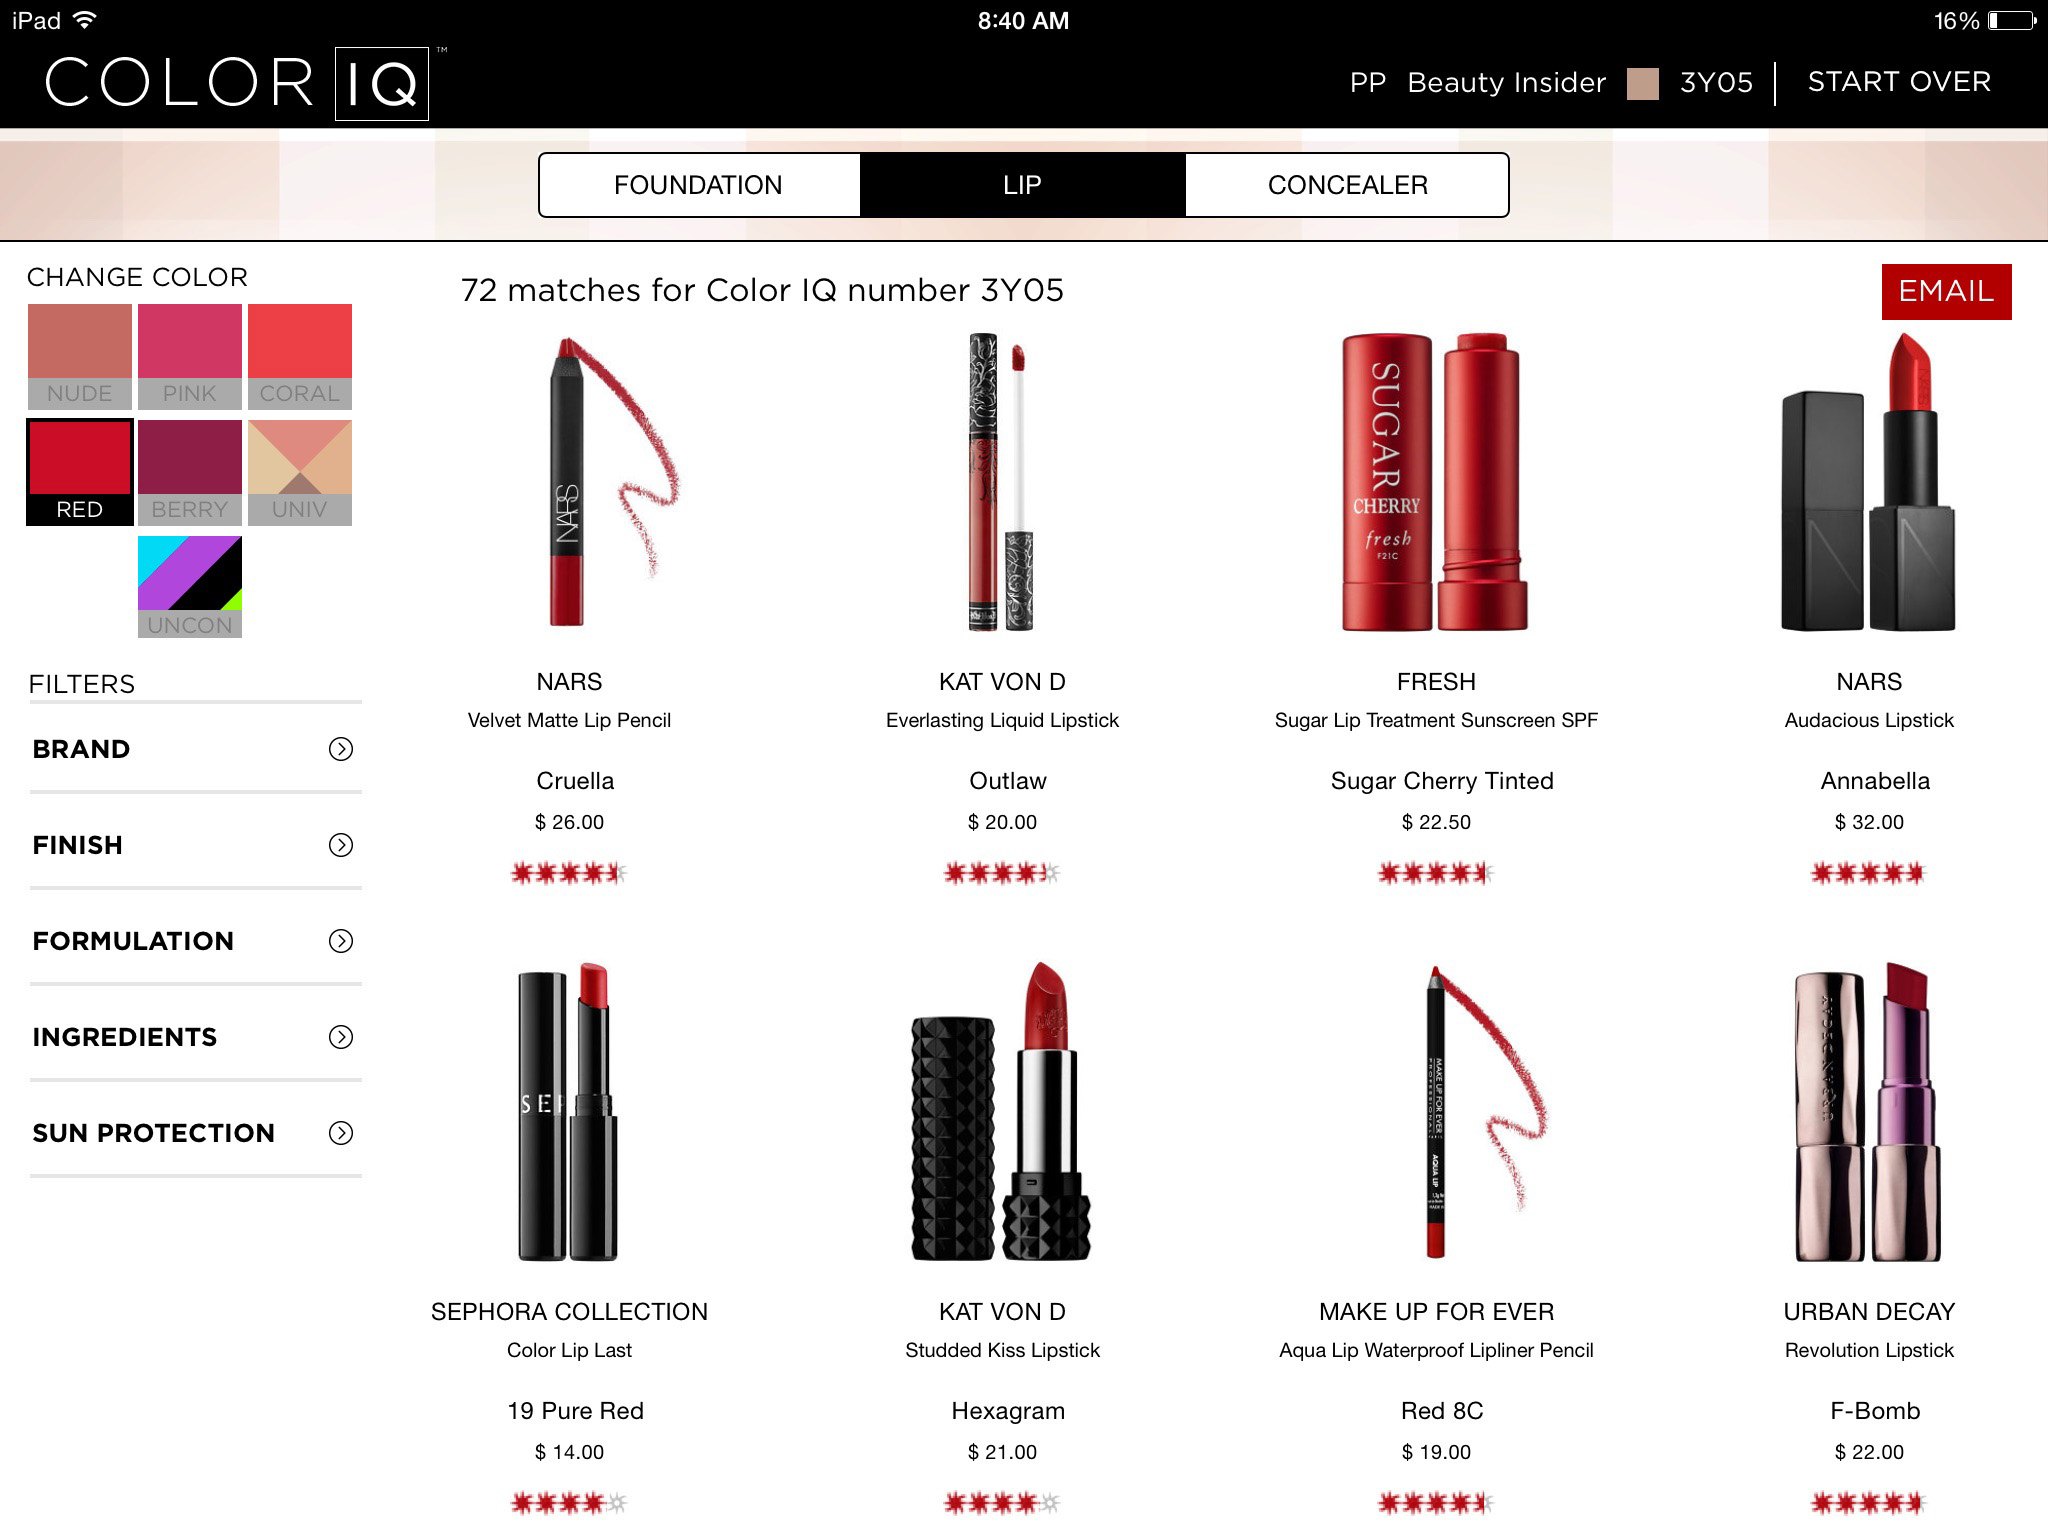 COLOR IQ LIP AND CONCEALER